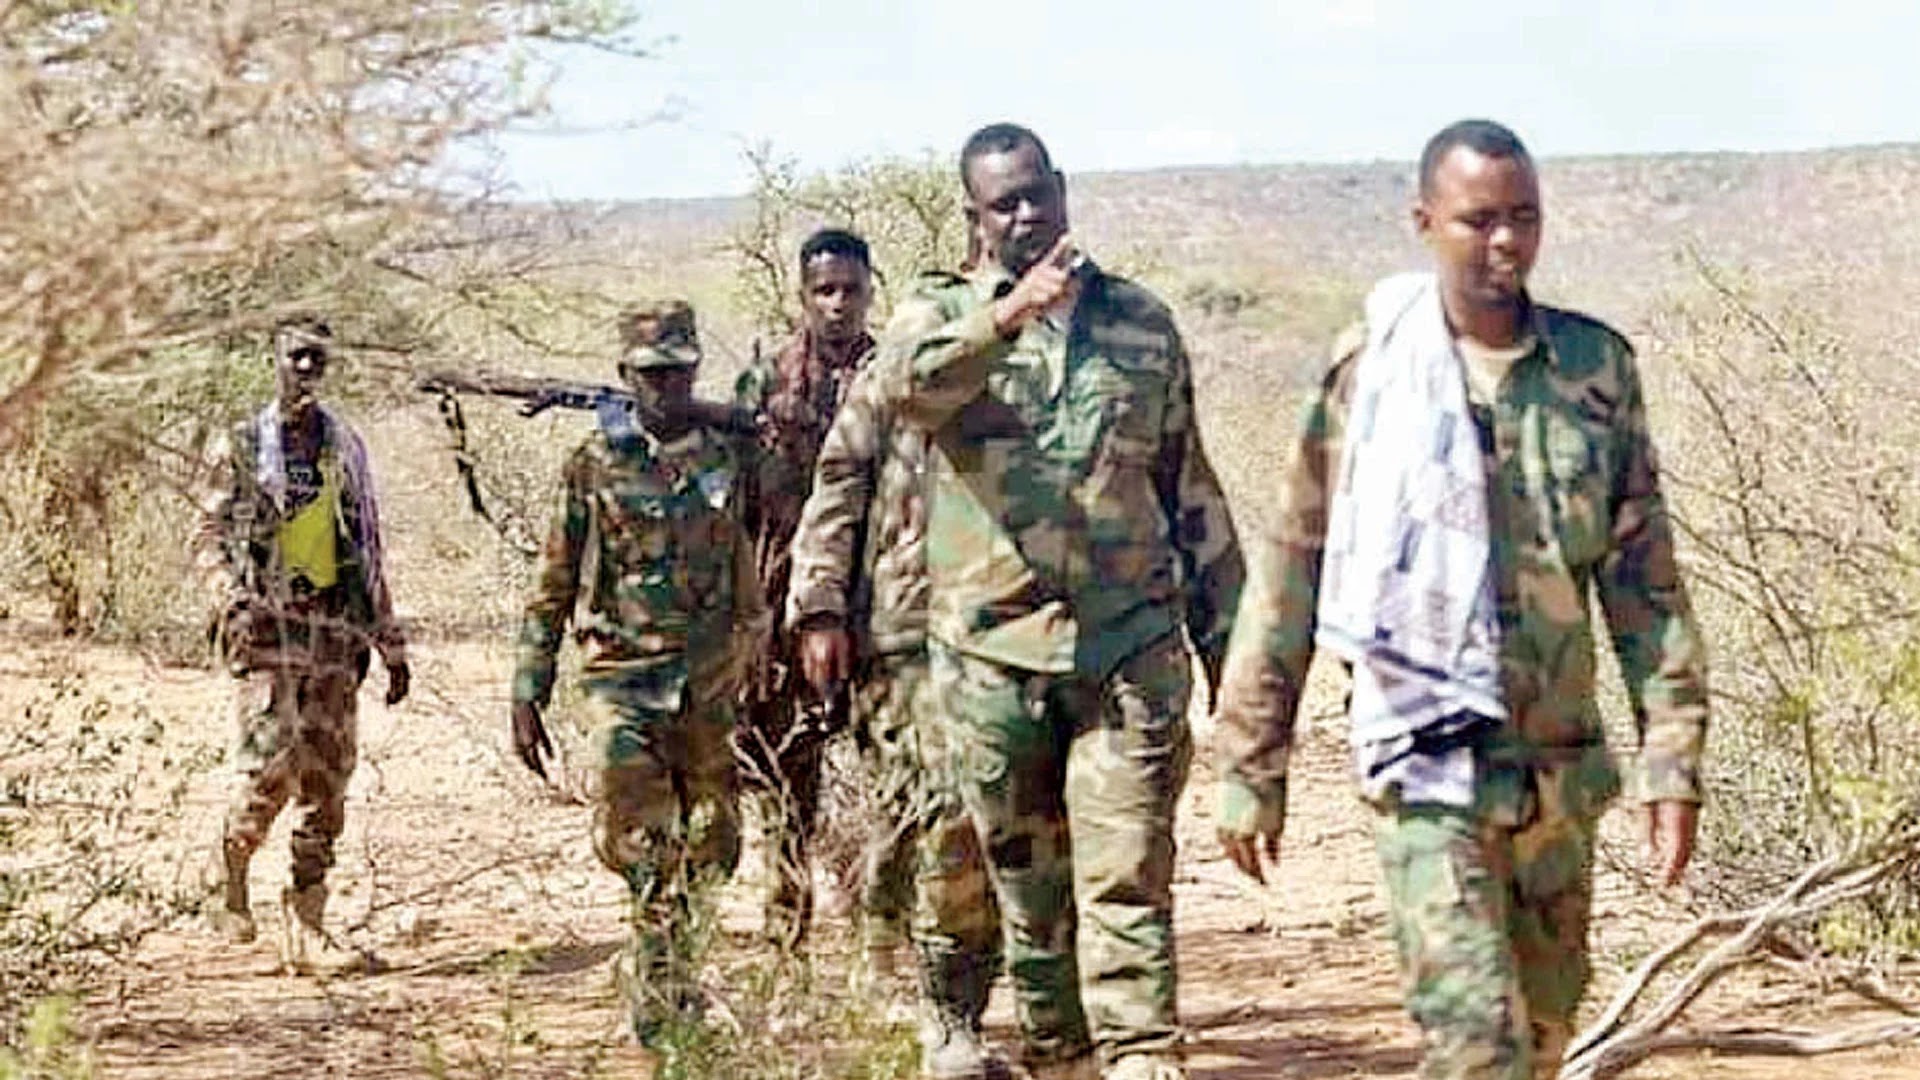 The Galgudud and Hiran governorates are making a great preparation for the huge war with alshabaab.